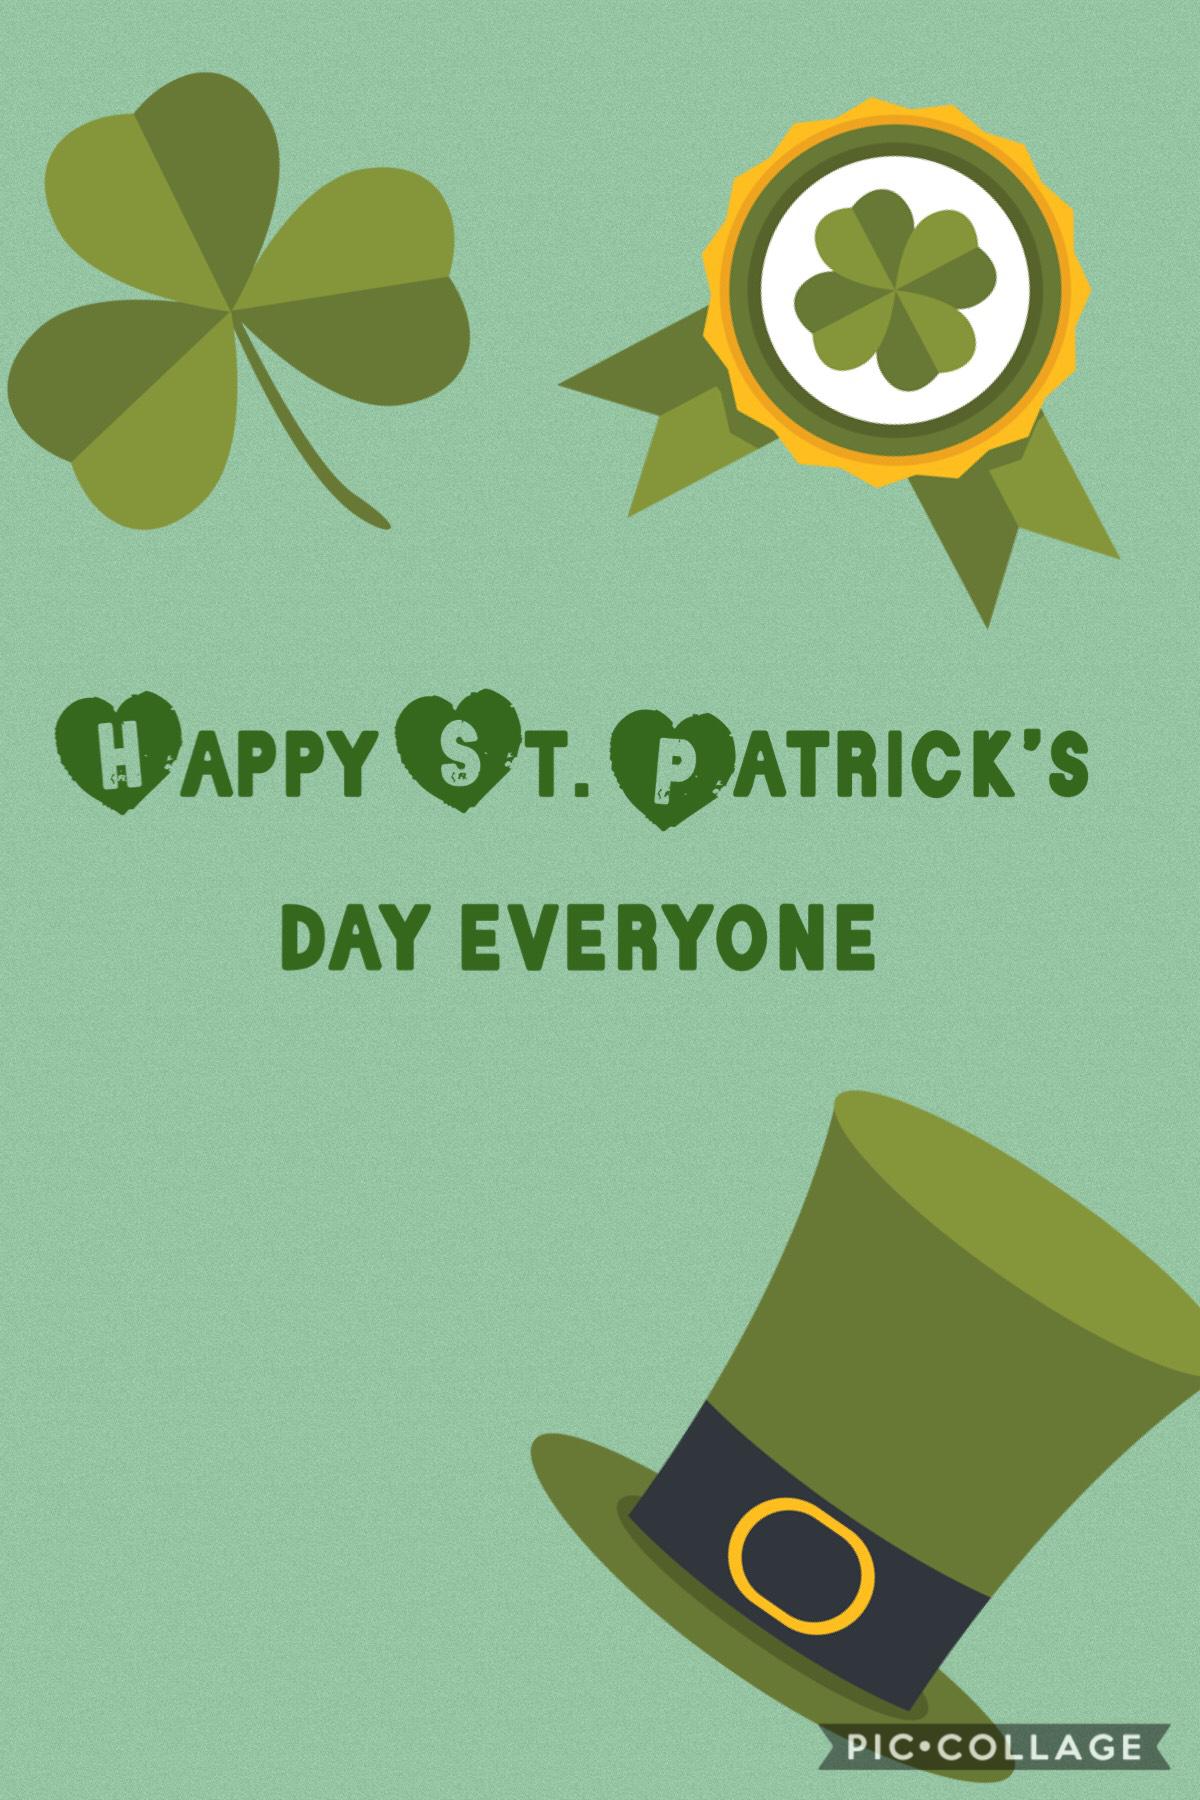 Happy St. Patrick’s day everyone